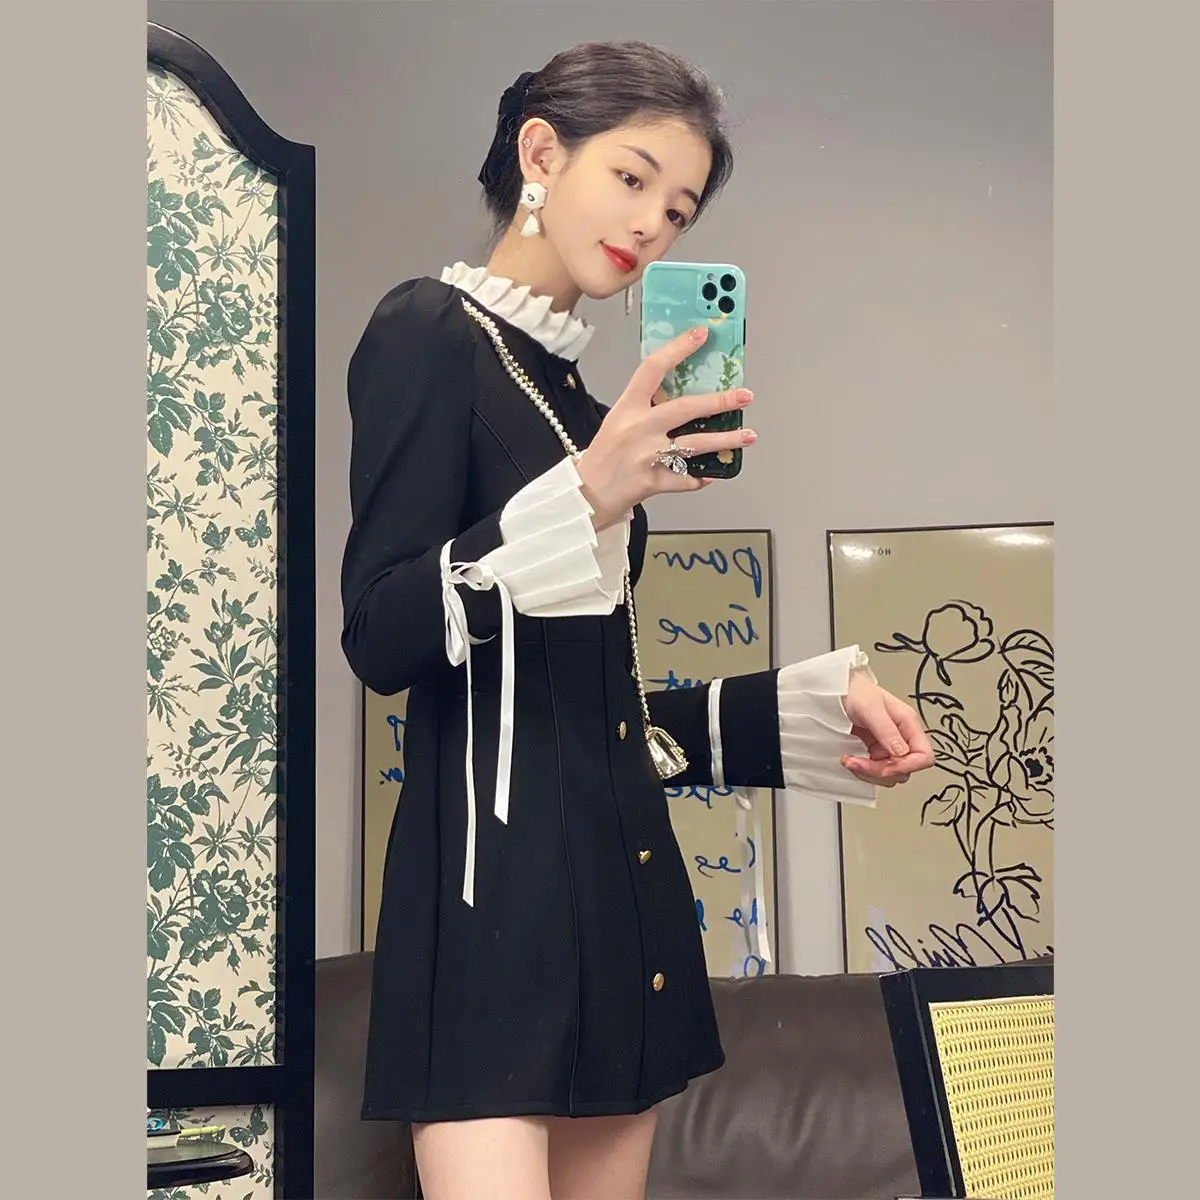 Mini Dress Women Spring Design Sexy Skinny Patchwork Popular Long Sleeve Vestidos Party Elegant Aesthetic All-match Chic Clothes dresses for women